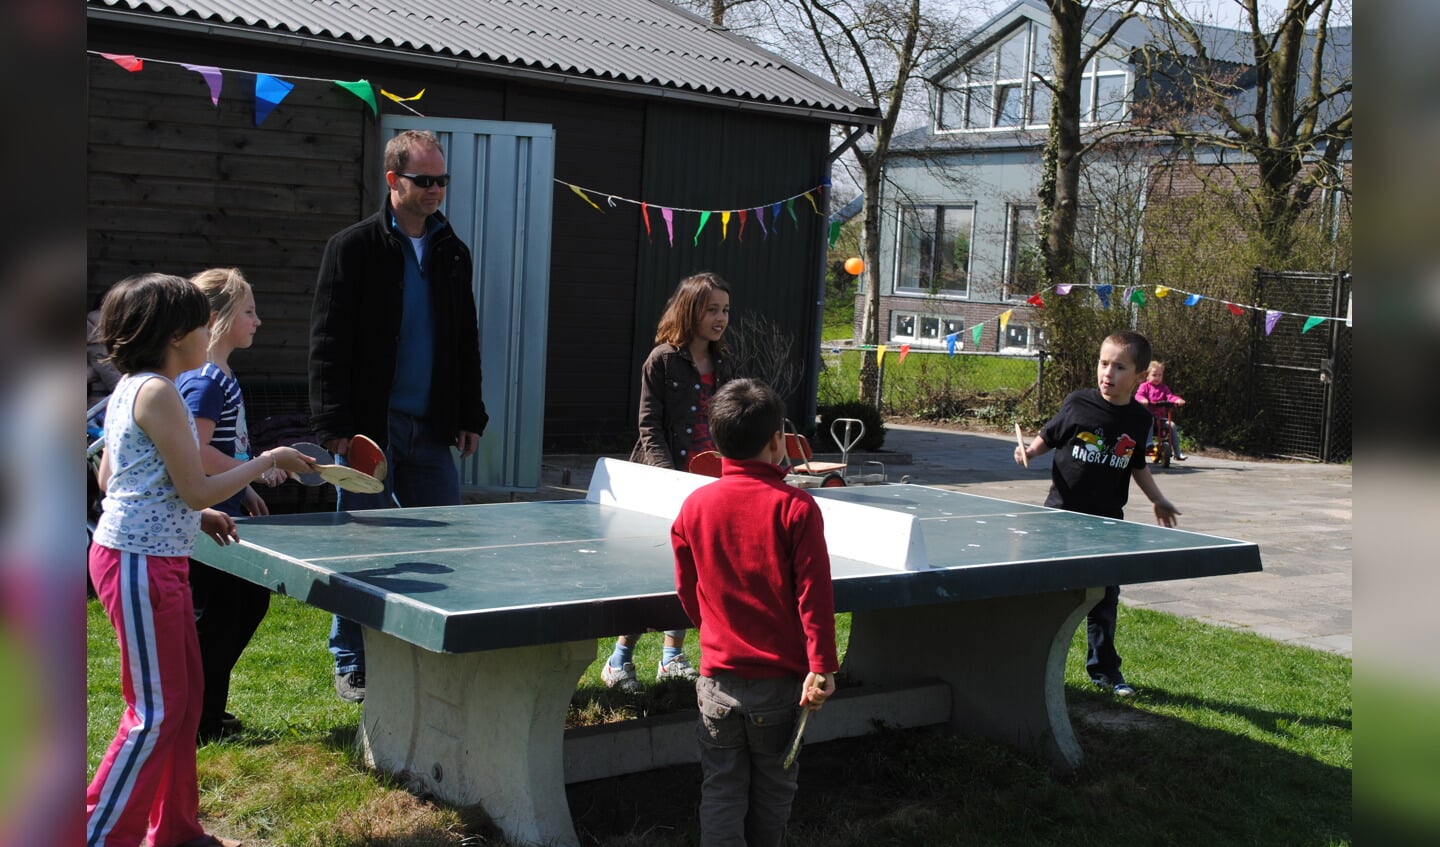 Potje ping pong